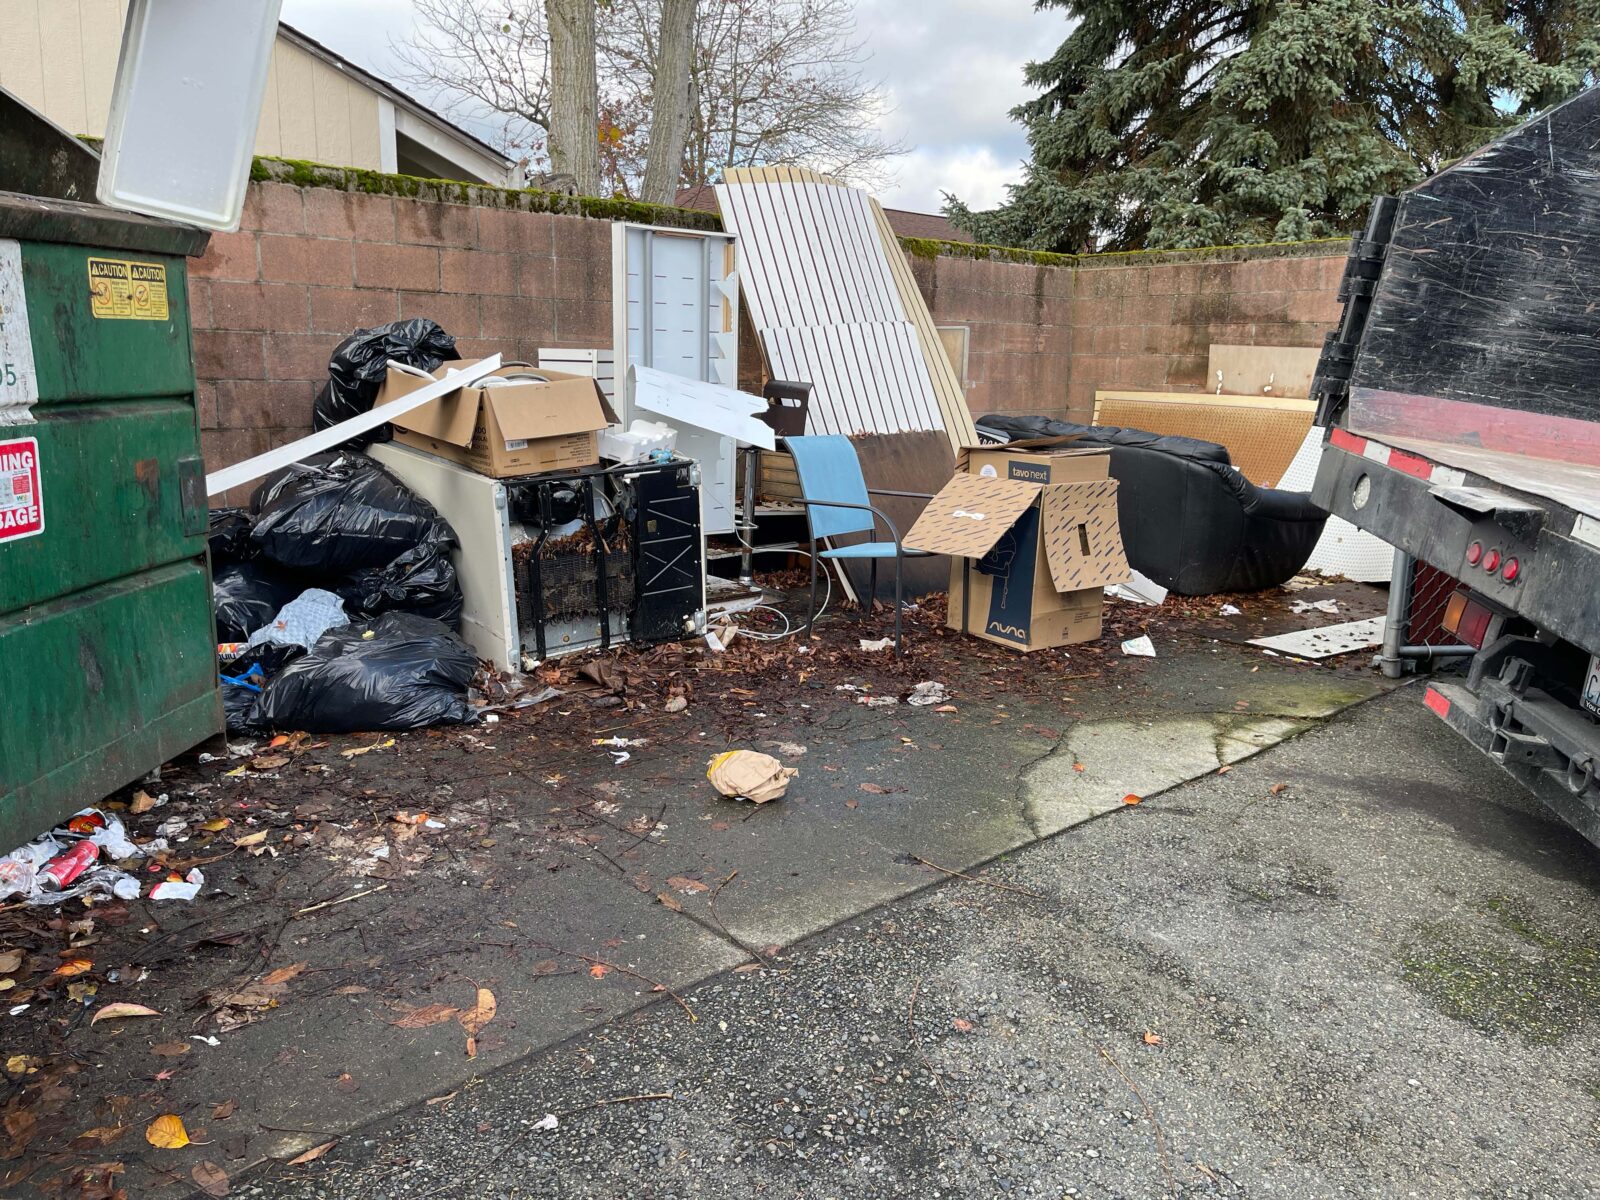 Expert Junk Removal Services ,North Idaho